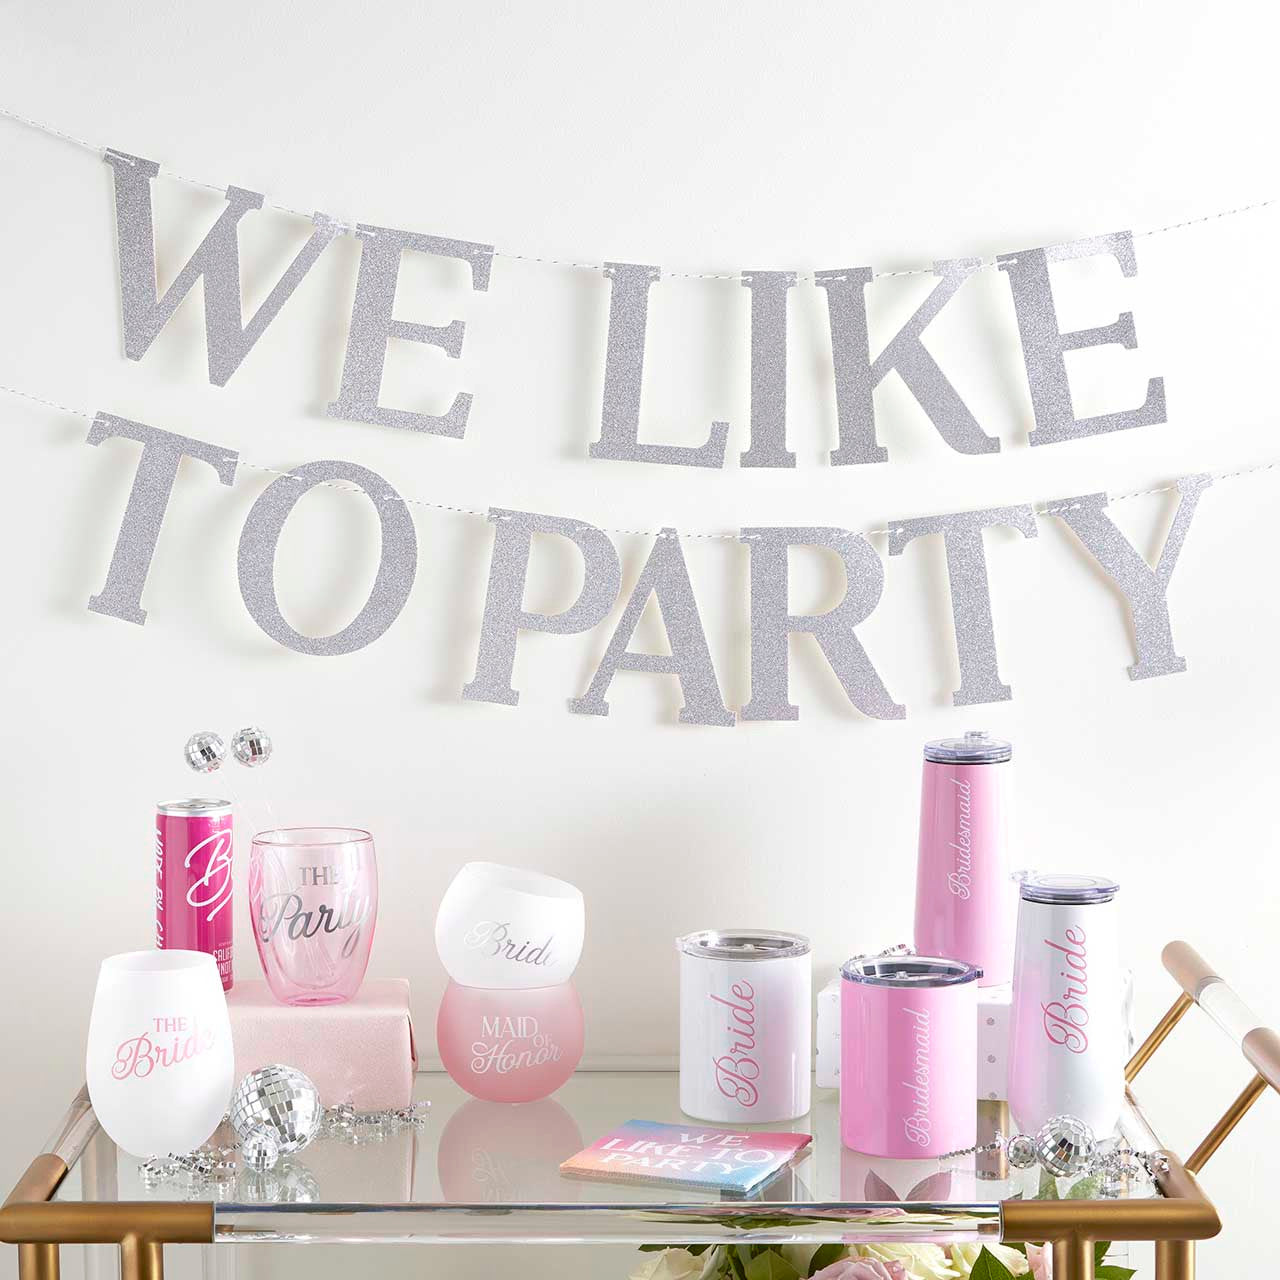 We Like To Party Paper Garland Banner | 6ft. Long